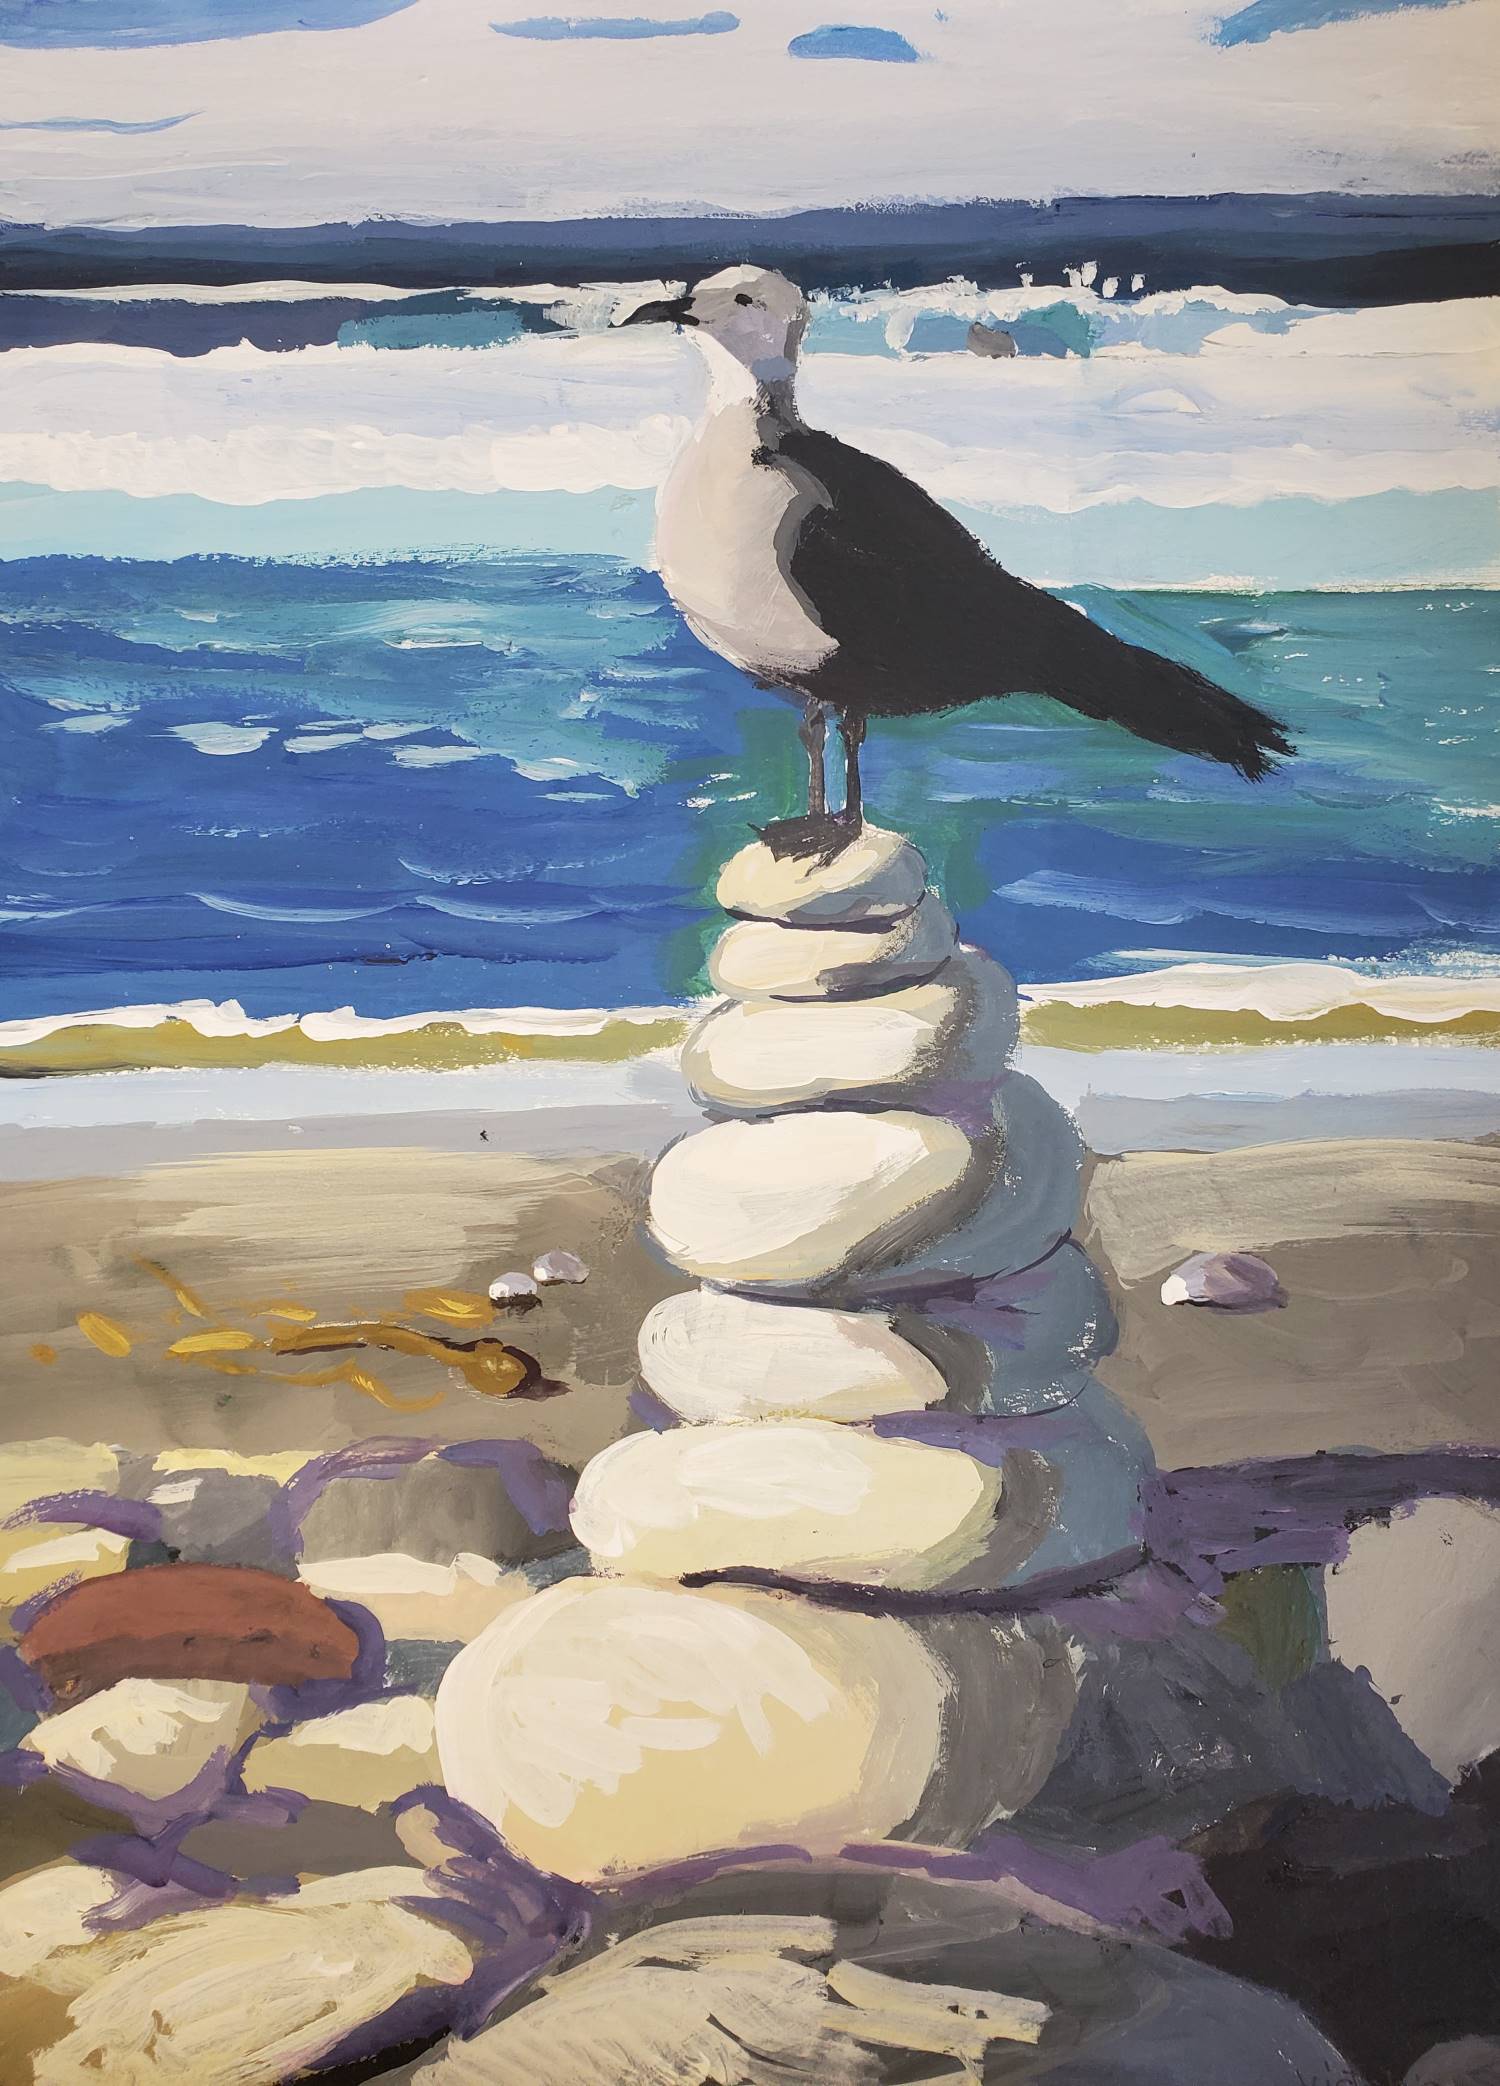 A gull perches on top of a stack of stones on the beach